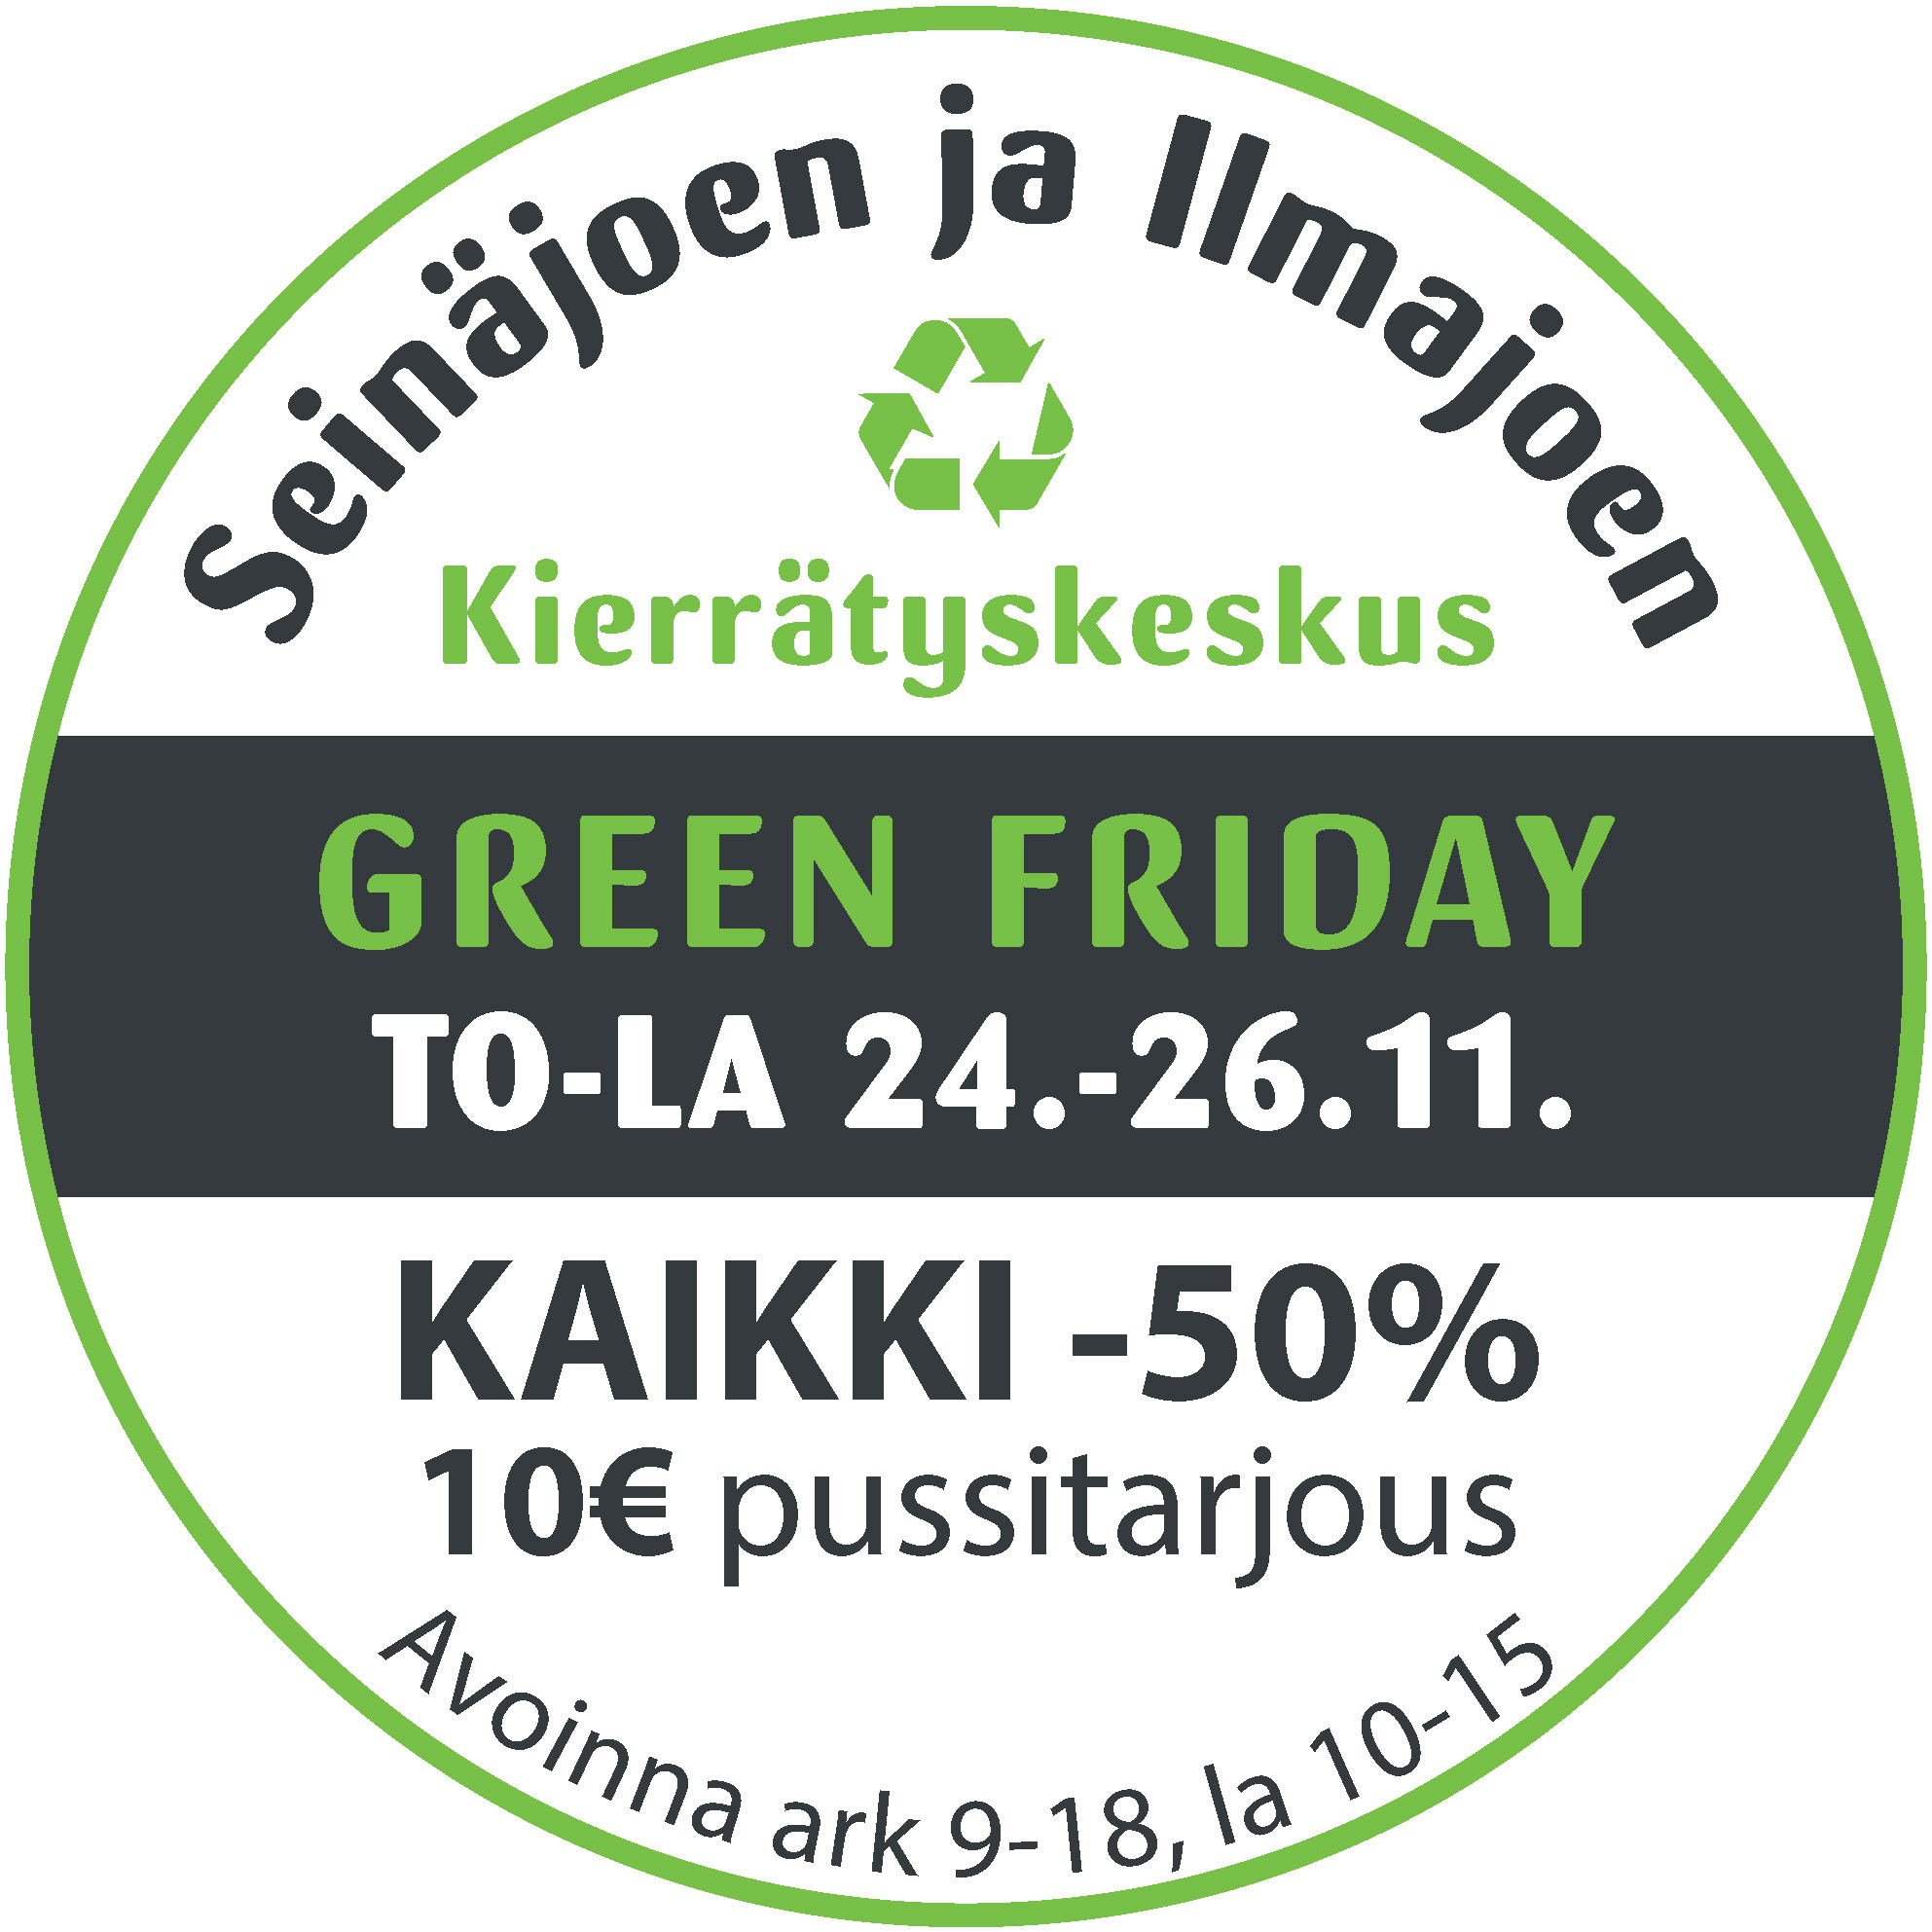 You are currently viewing Green Friday 24.-26.11.